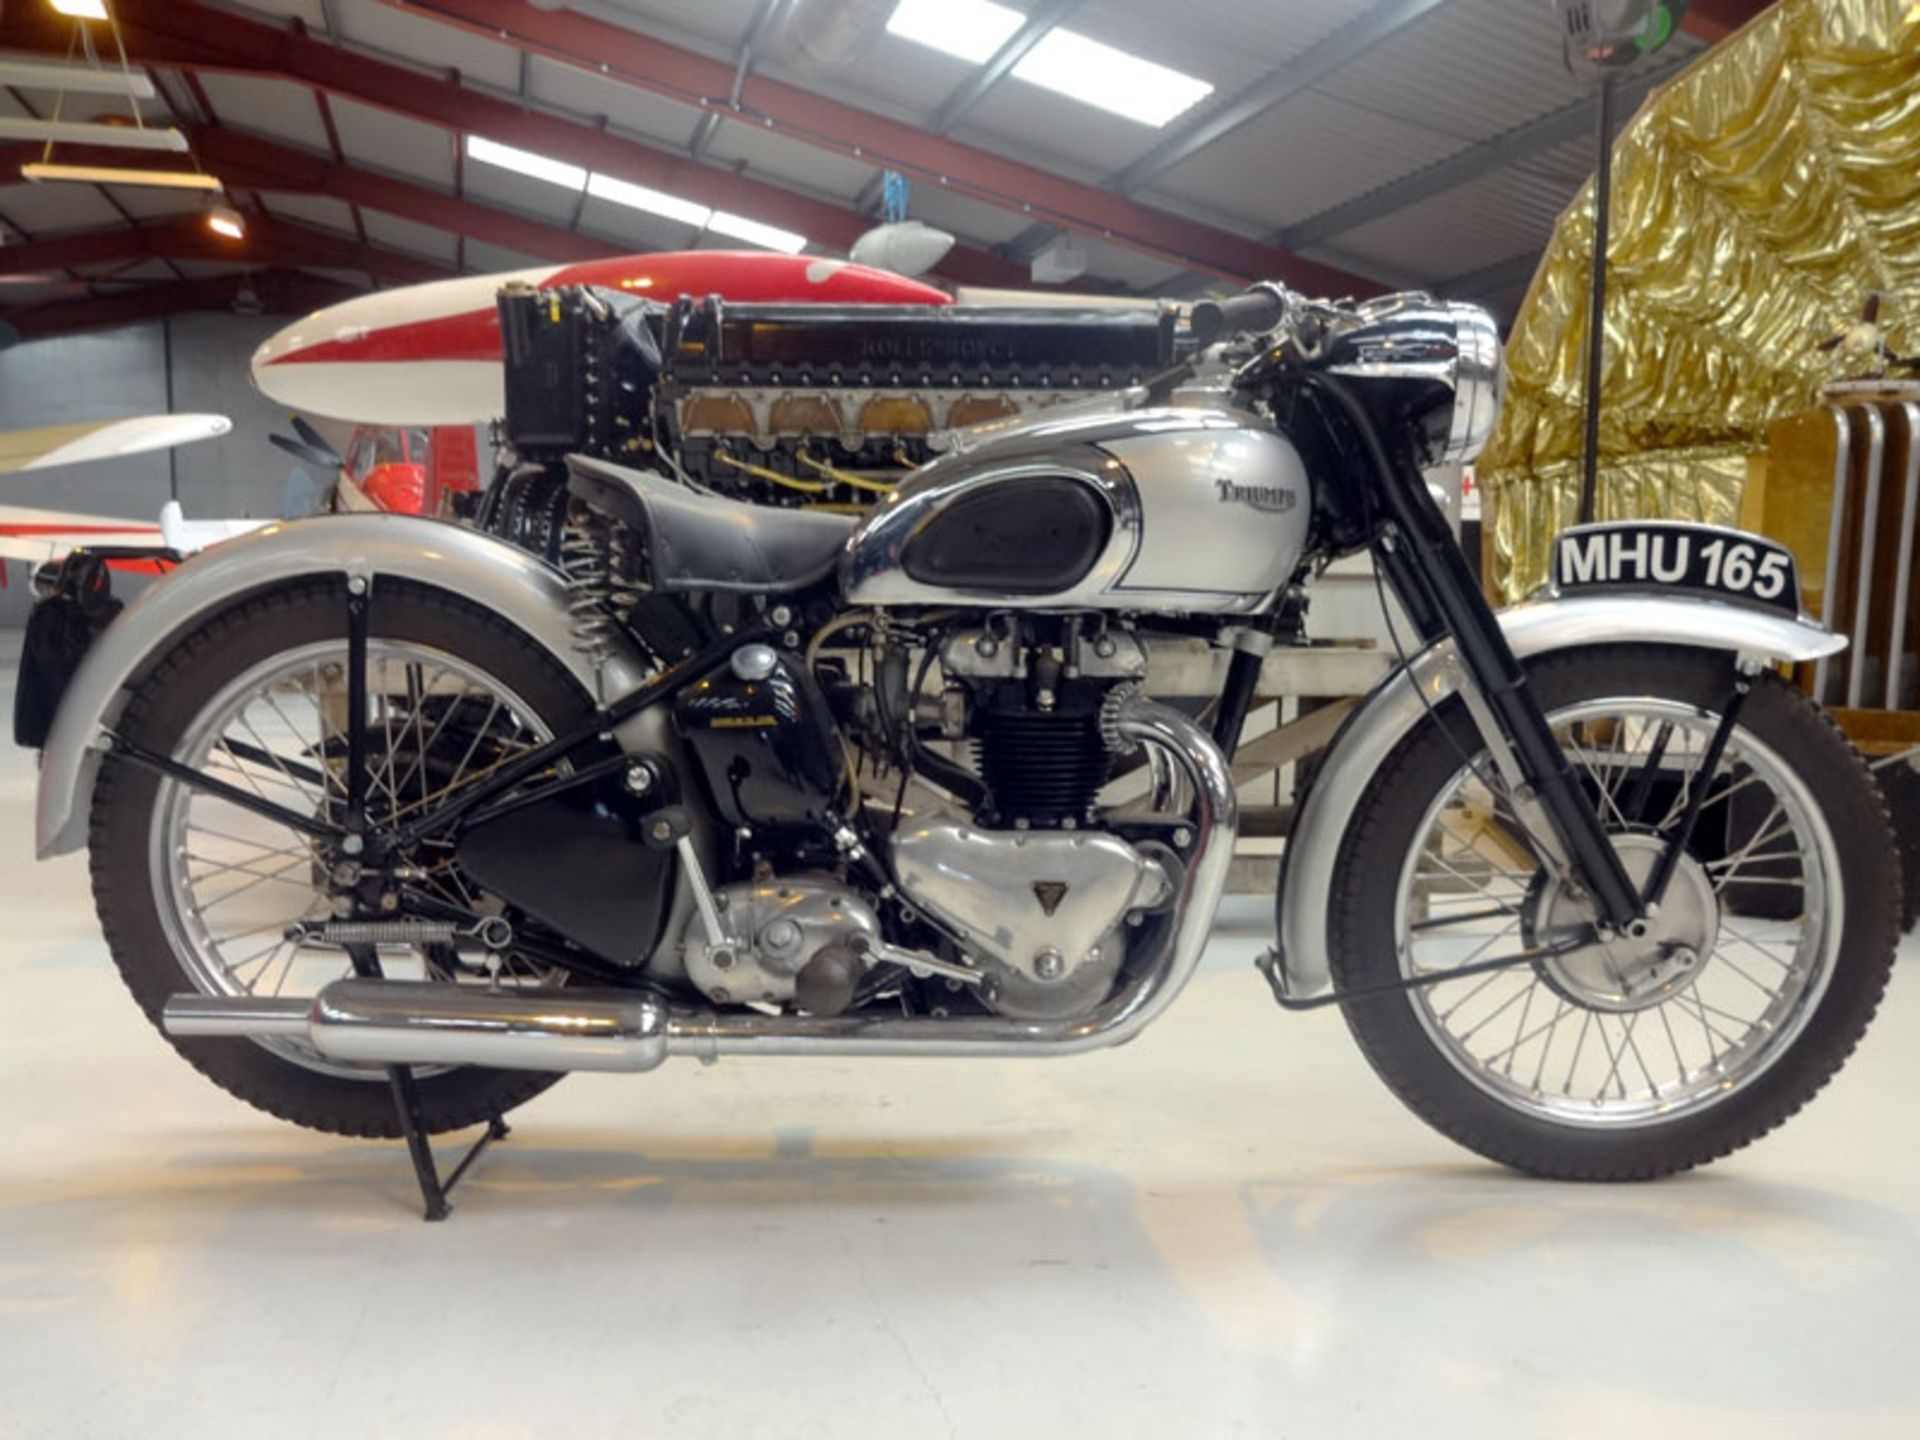 - Part of a private collection

- Restored bike

- Comes complete with V5